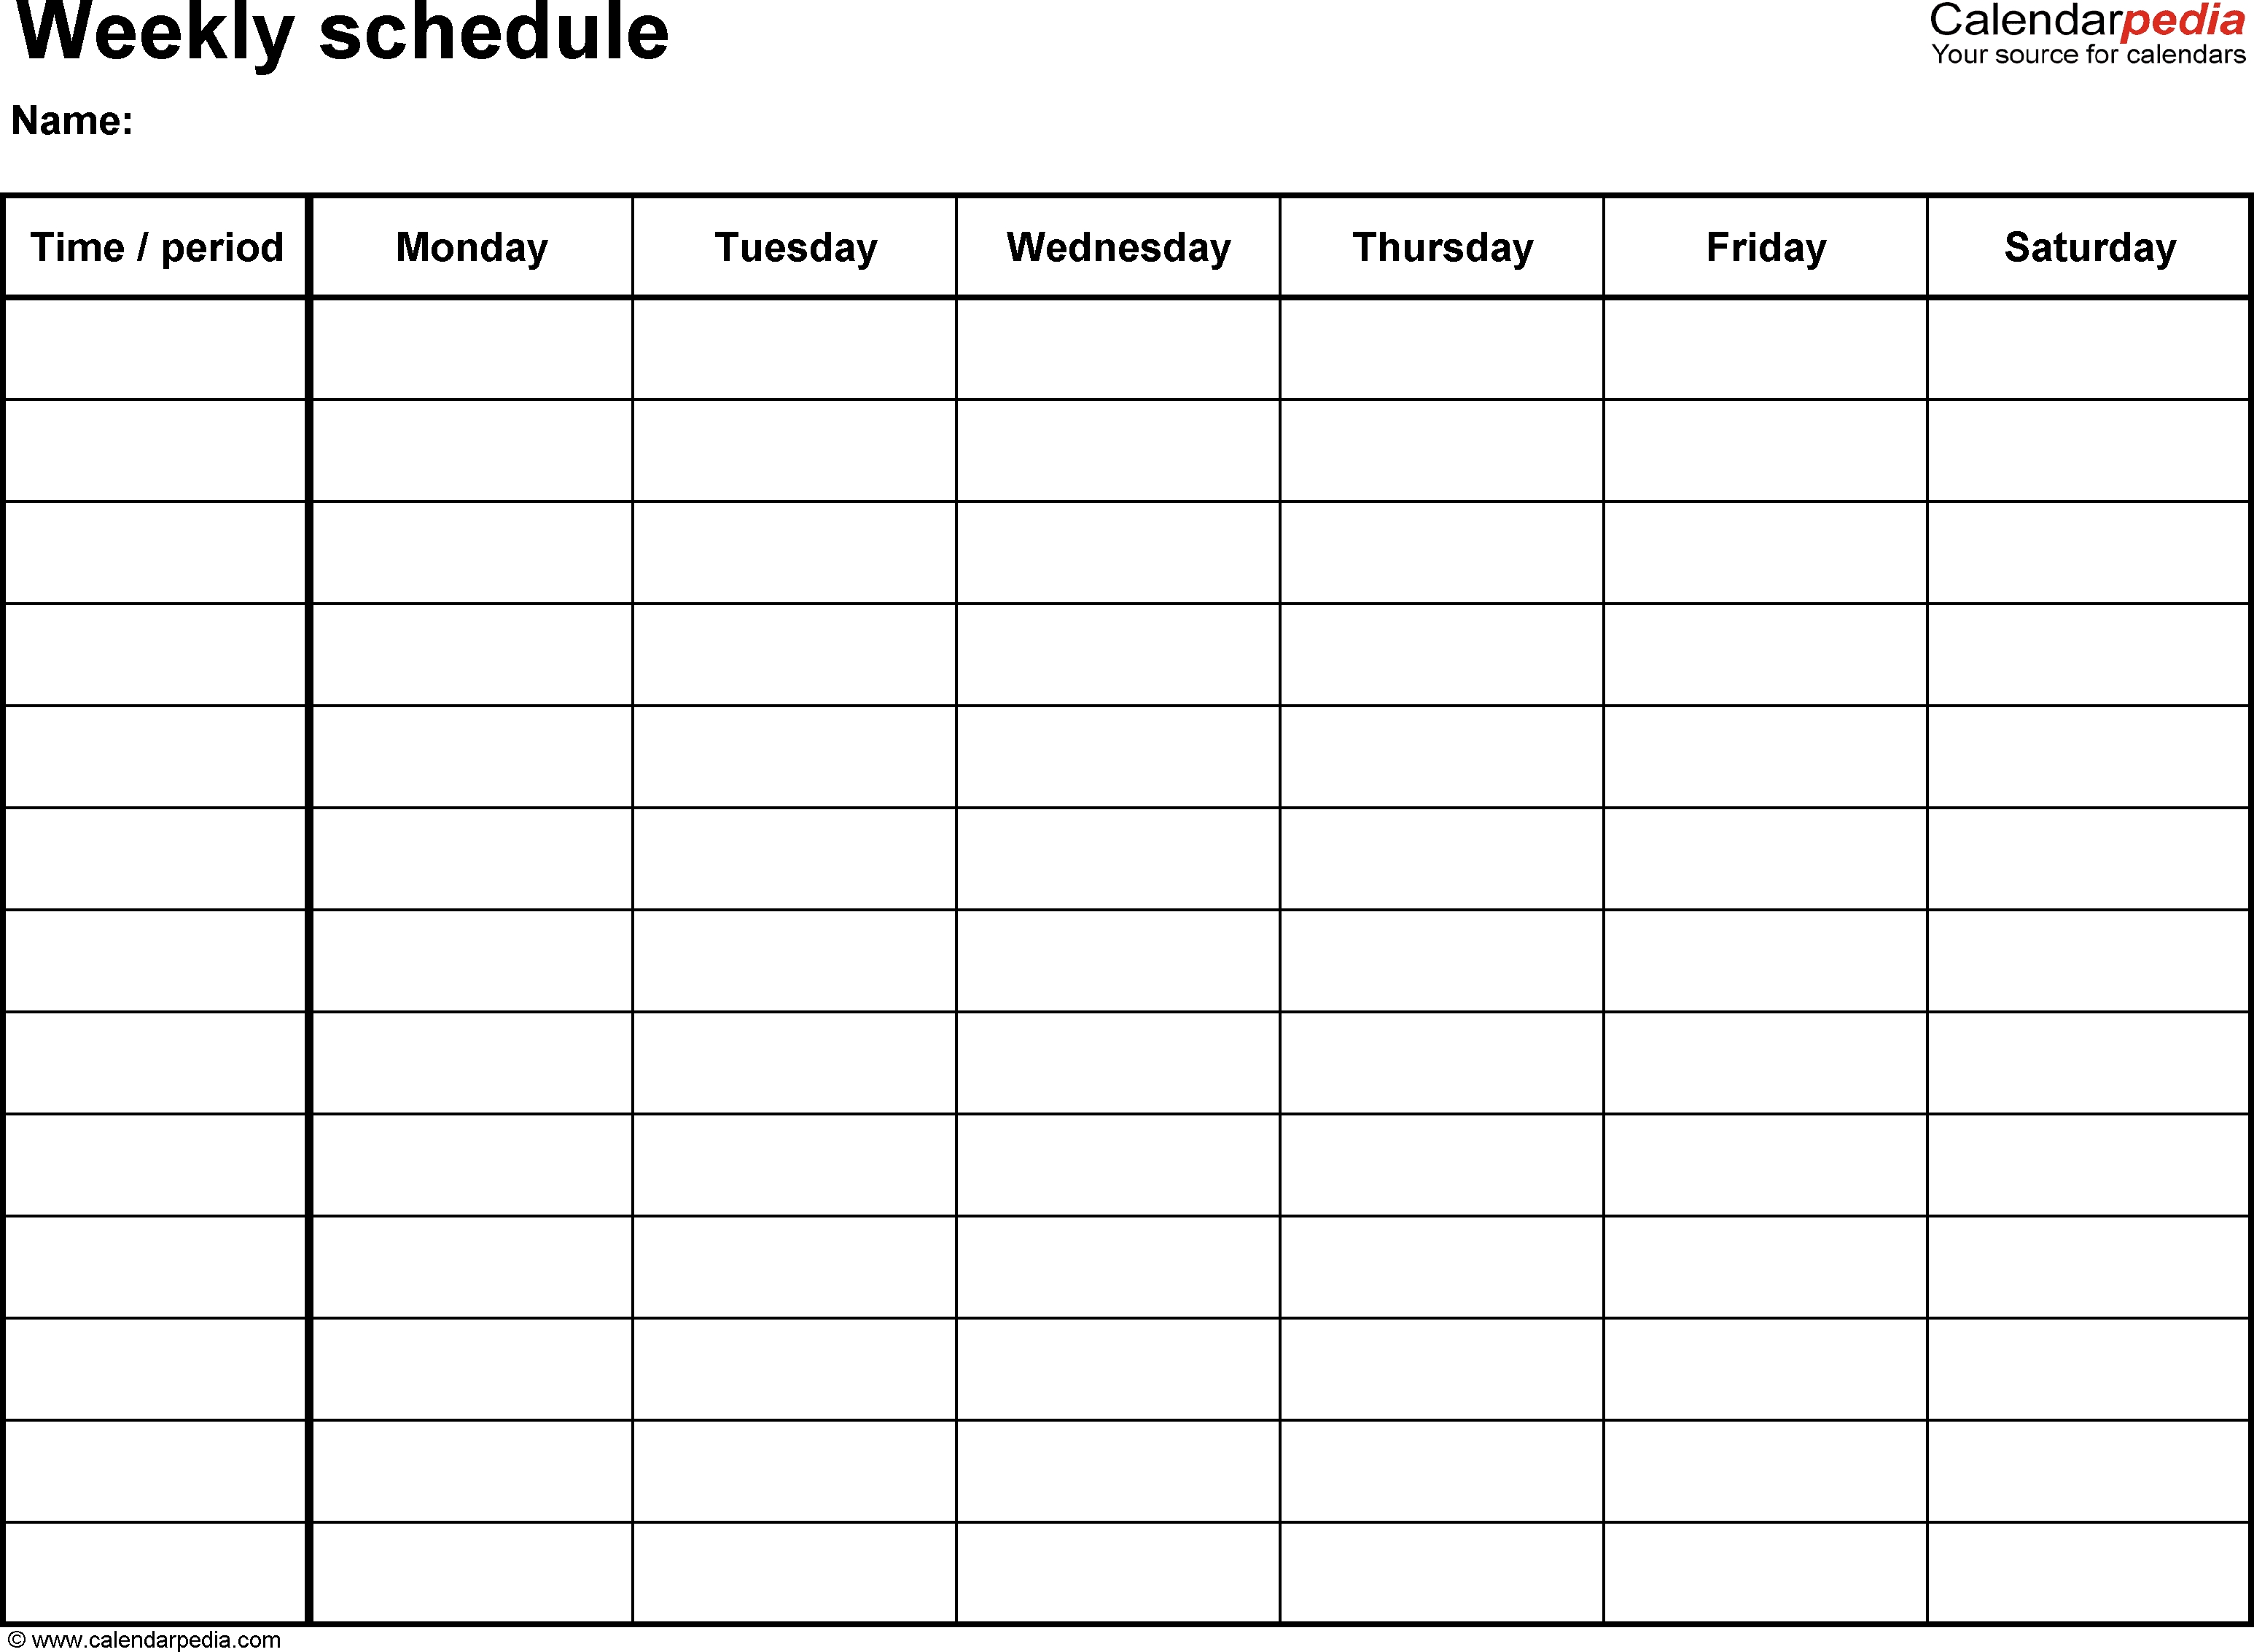 Free Weekly Schedule Templates For Pdf - 18 Templates pertaining to Weekly Calandar Template Starting Monday